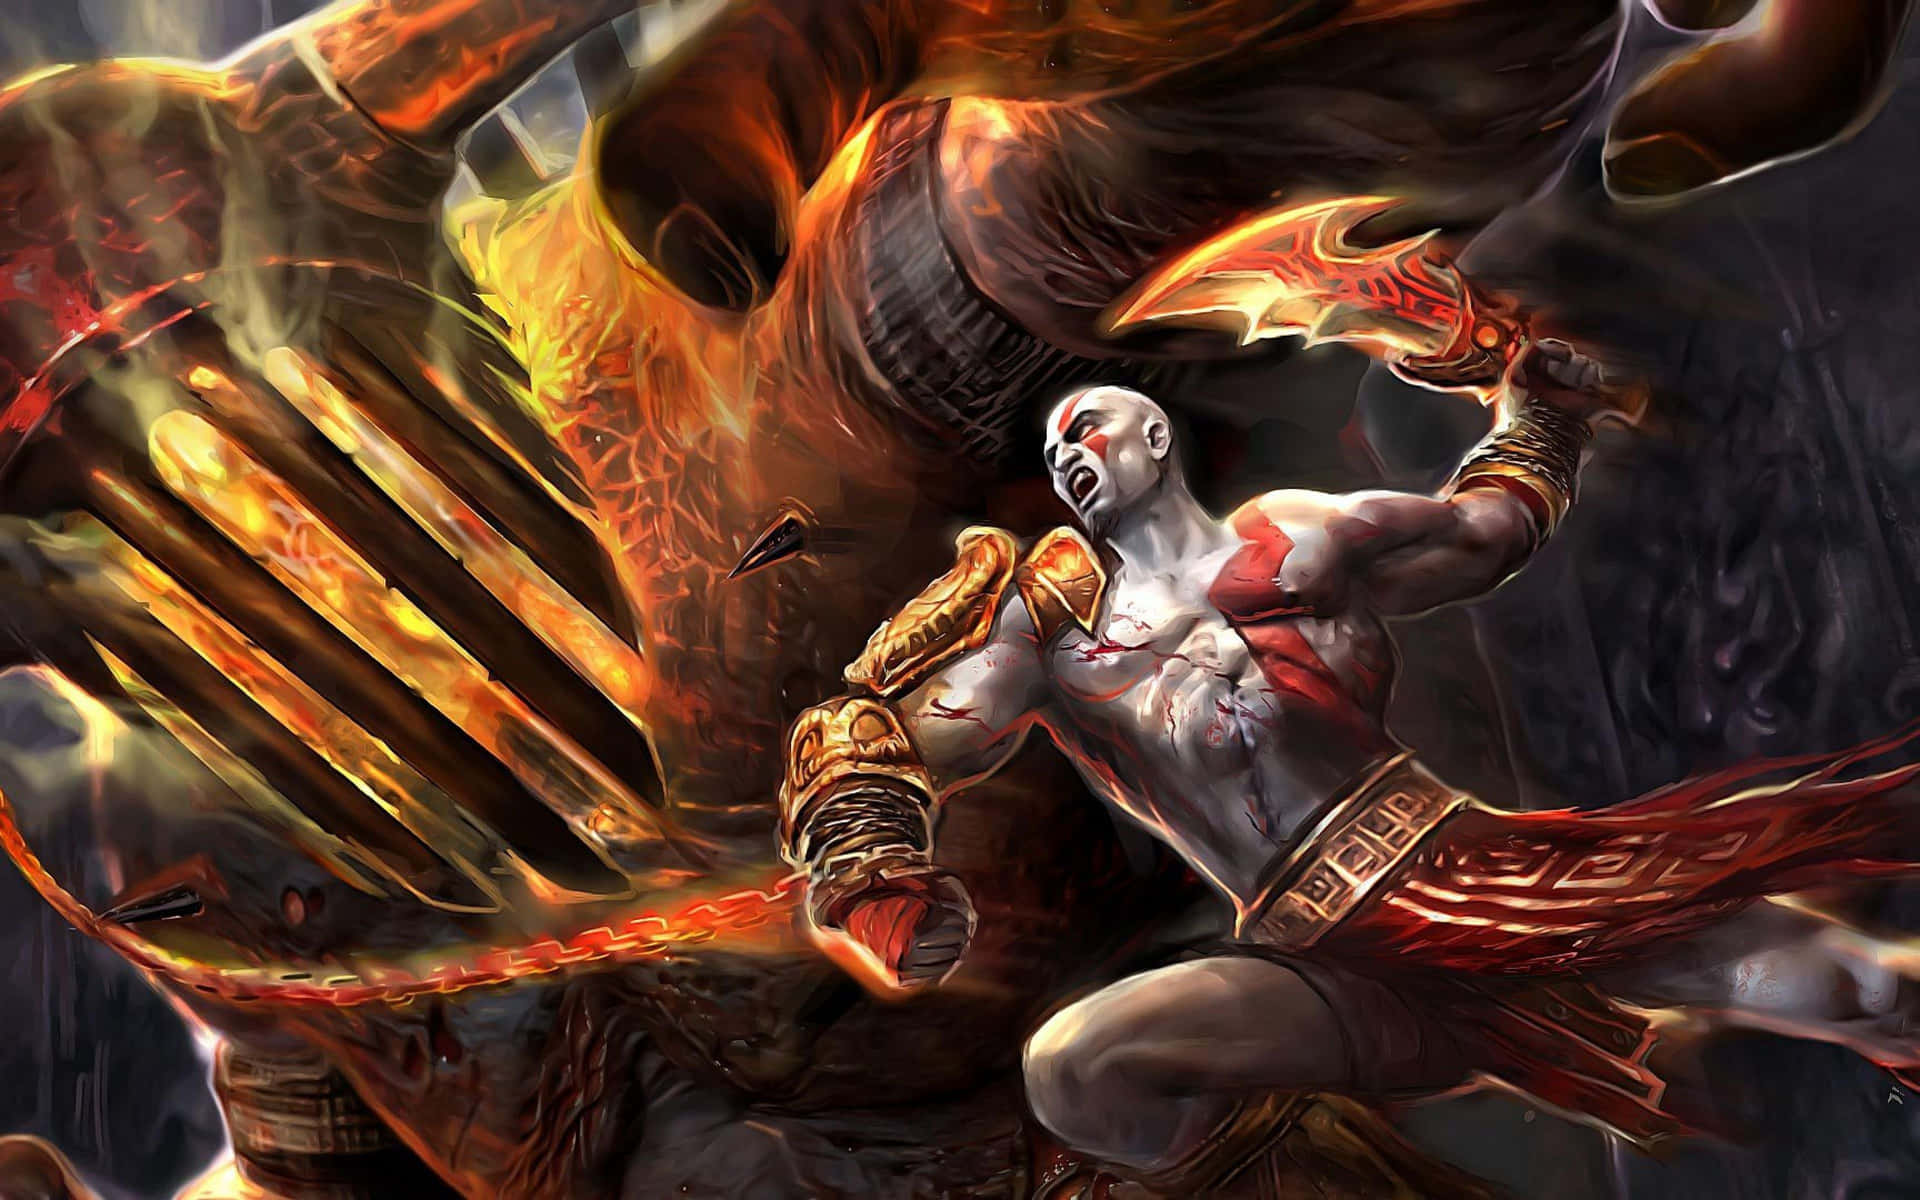 "Years Of War And Agony - Kratos In God Of War III" Wallpaper